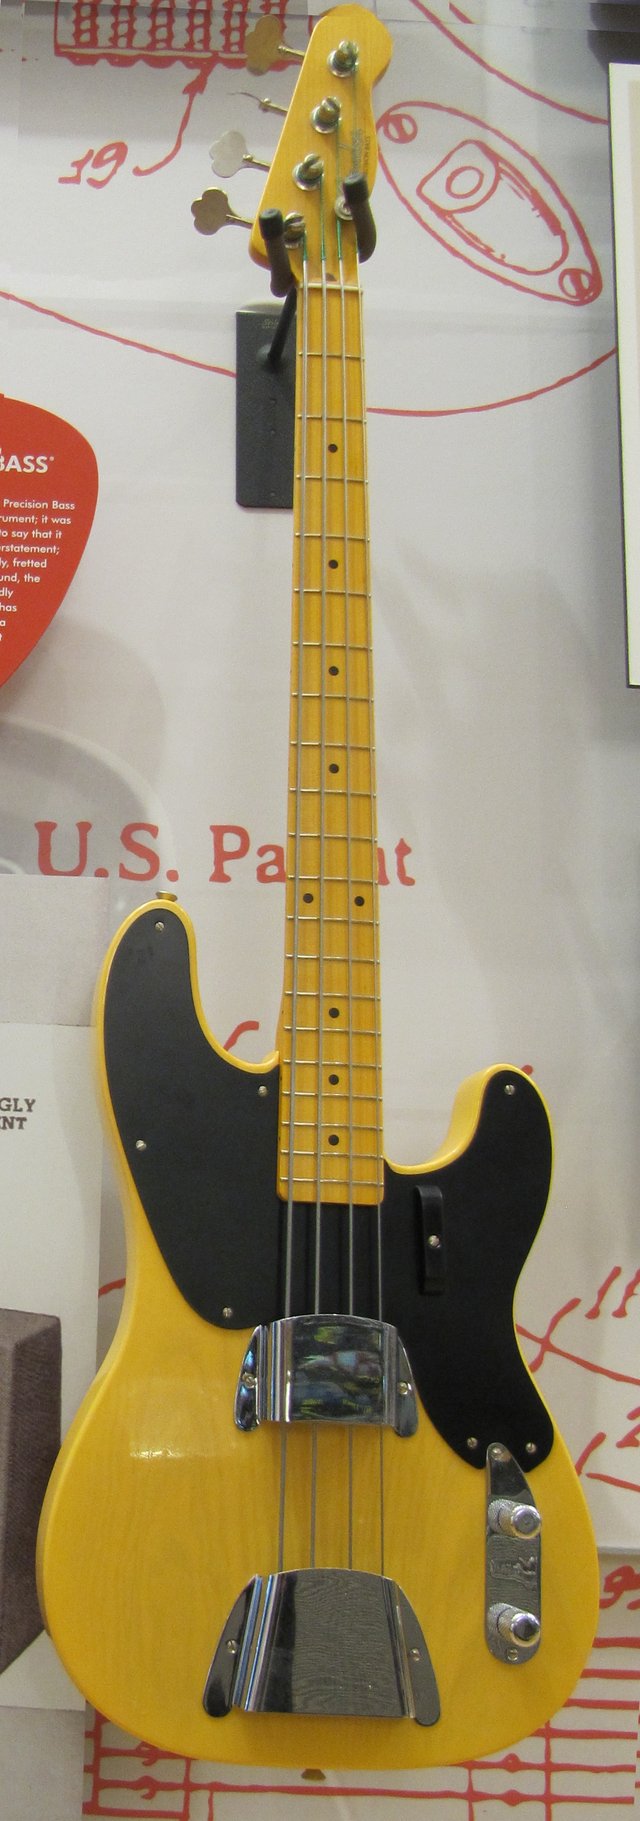 An early Fender Precision Bass